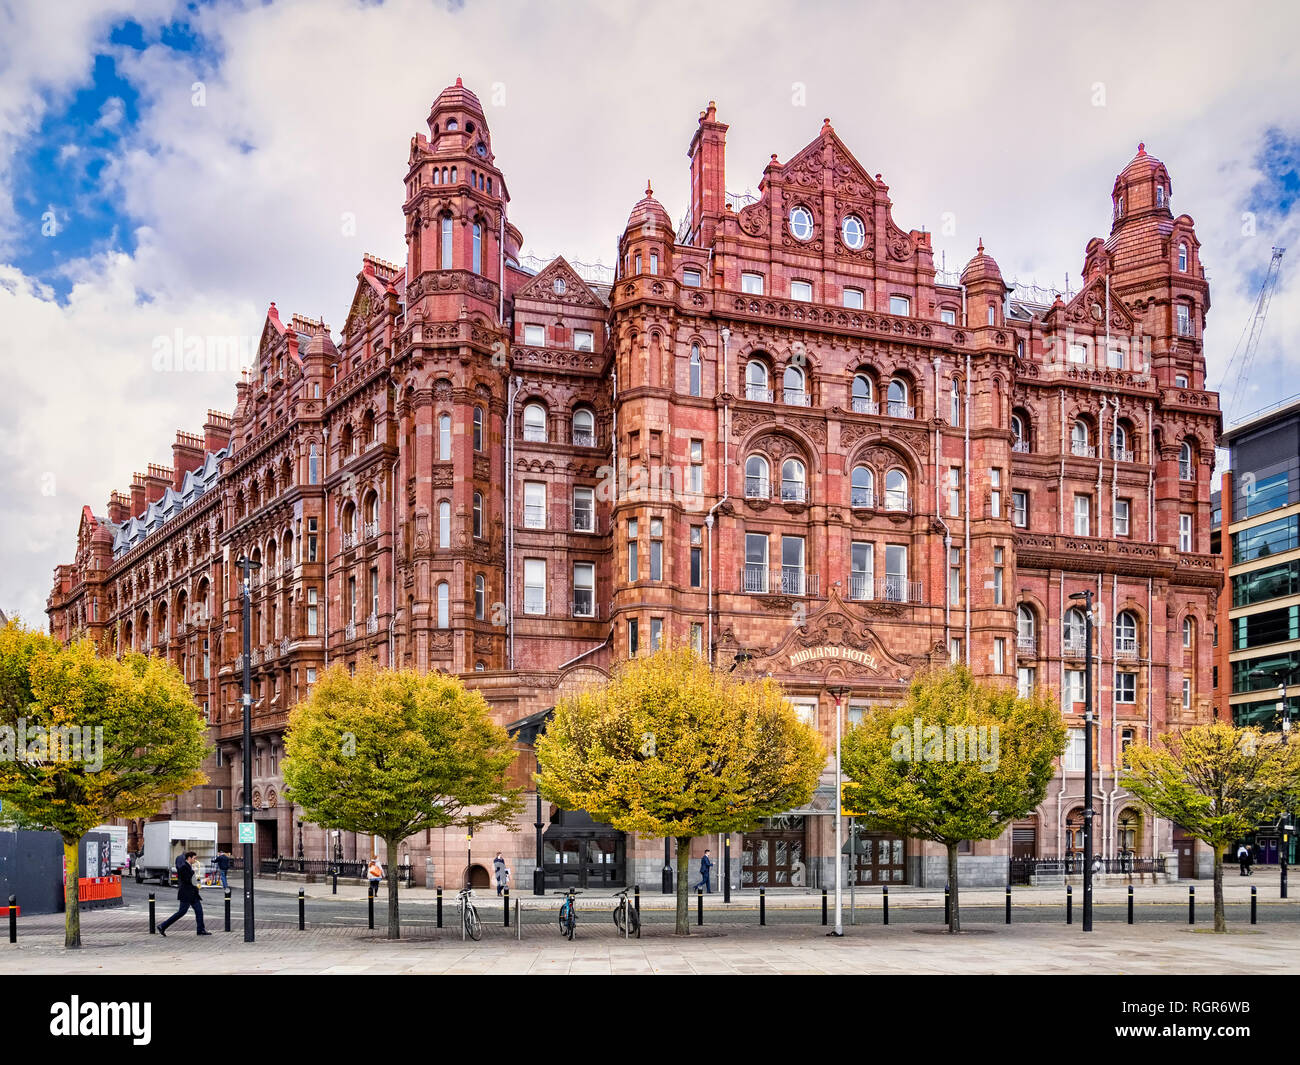 2 November 2018: Manchester, UK -  The Midland Hotel, a historic railway hotel facing the now closed Manchester Central Station. Stock Photo